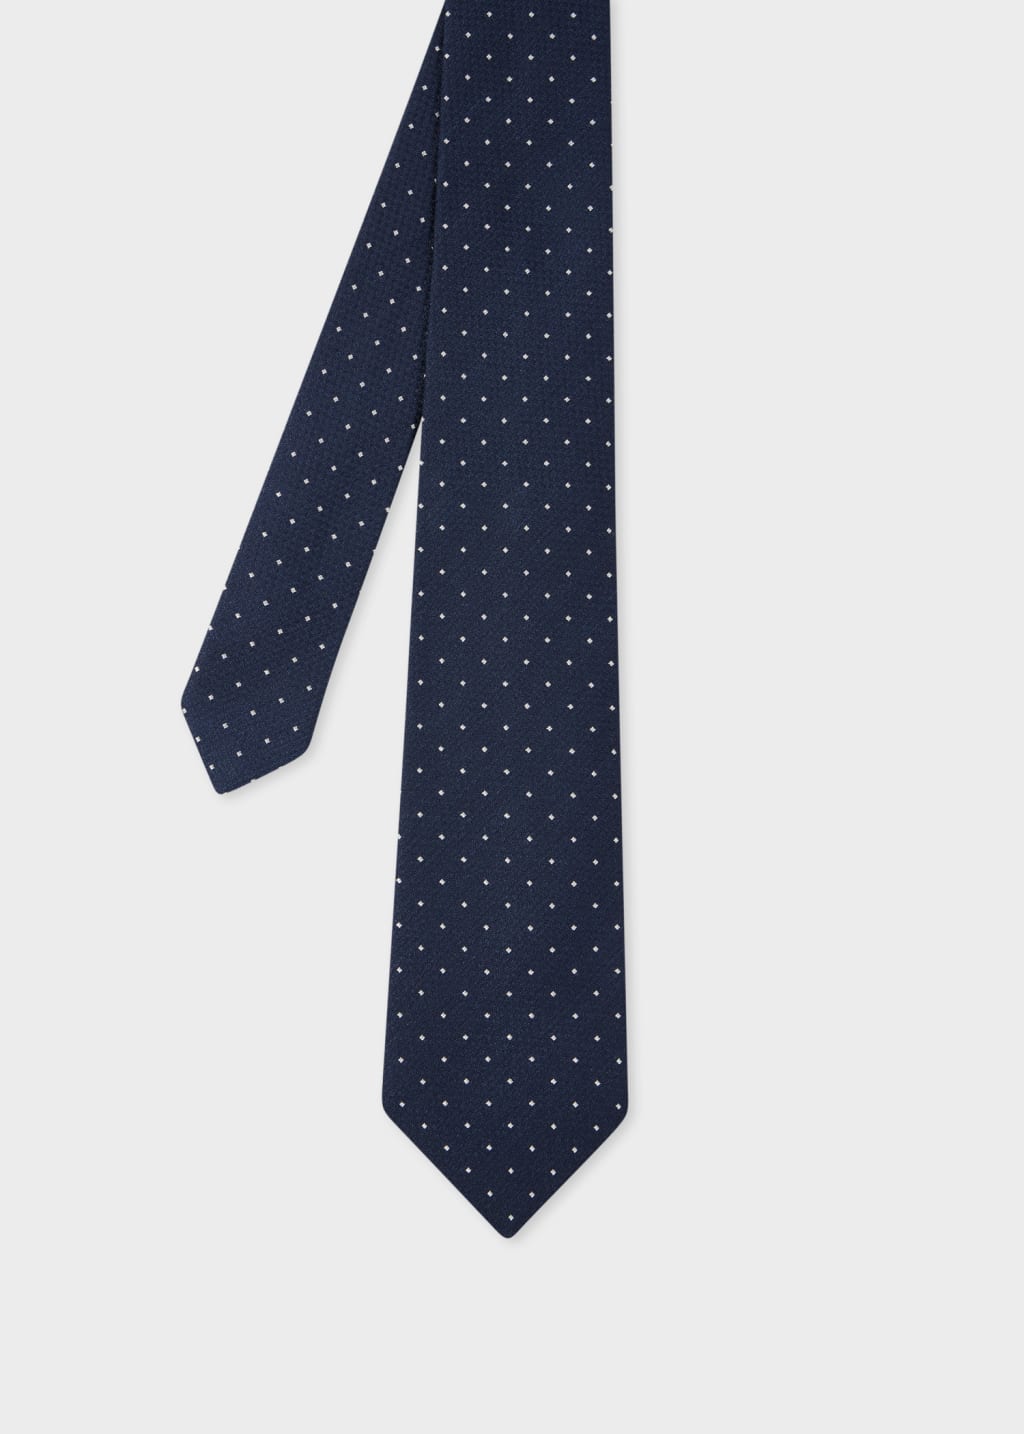 Front View - Navy Cubic Polka Dot Tie Paul Smith